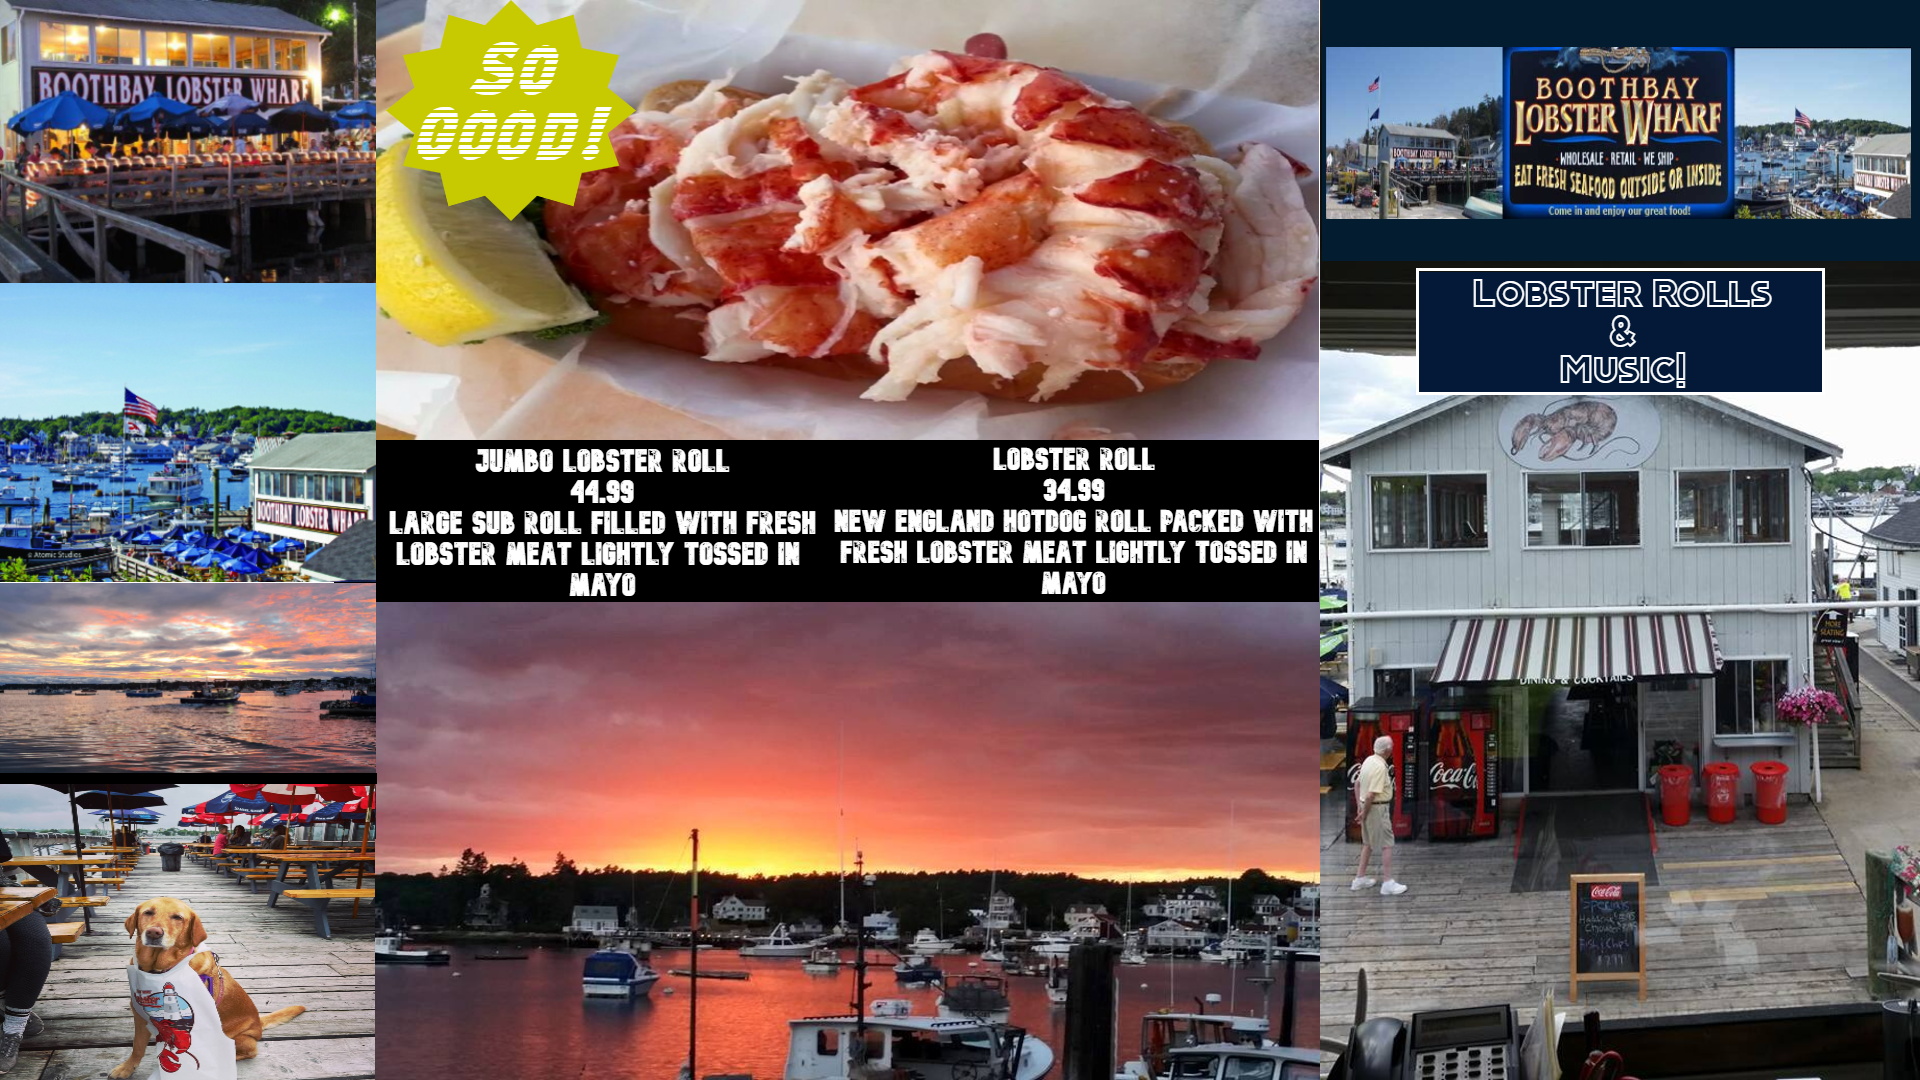 Boothbay Lobster Wharf - Restaurant in Boothbay Harbor, ME